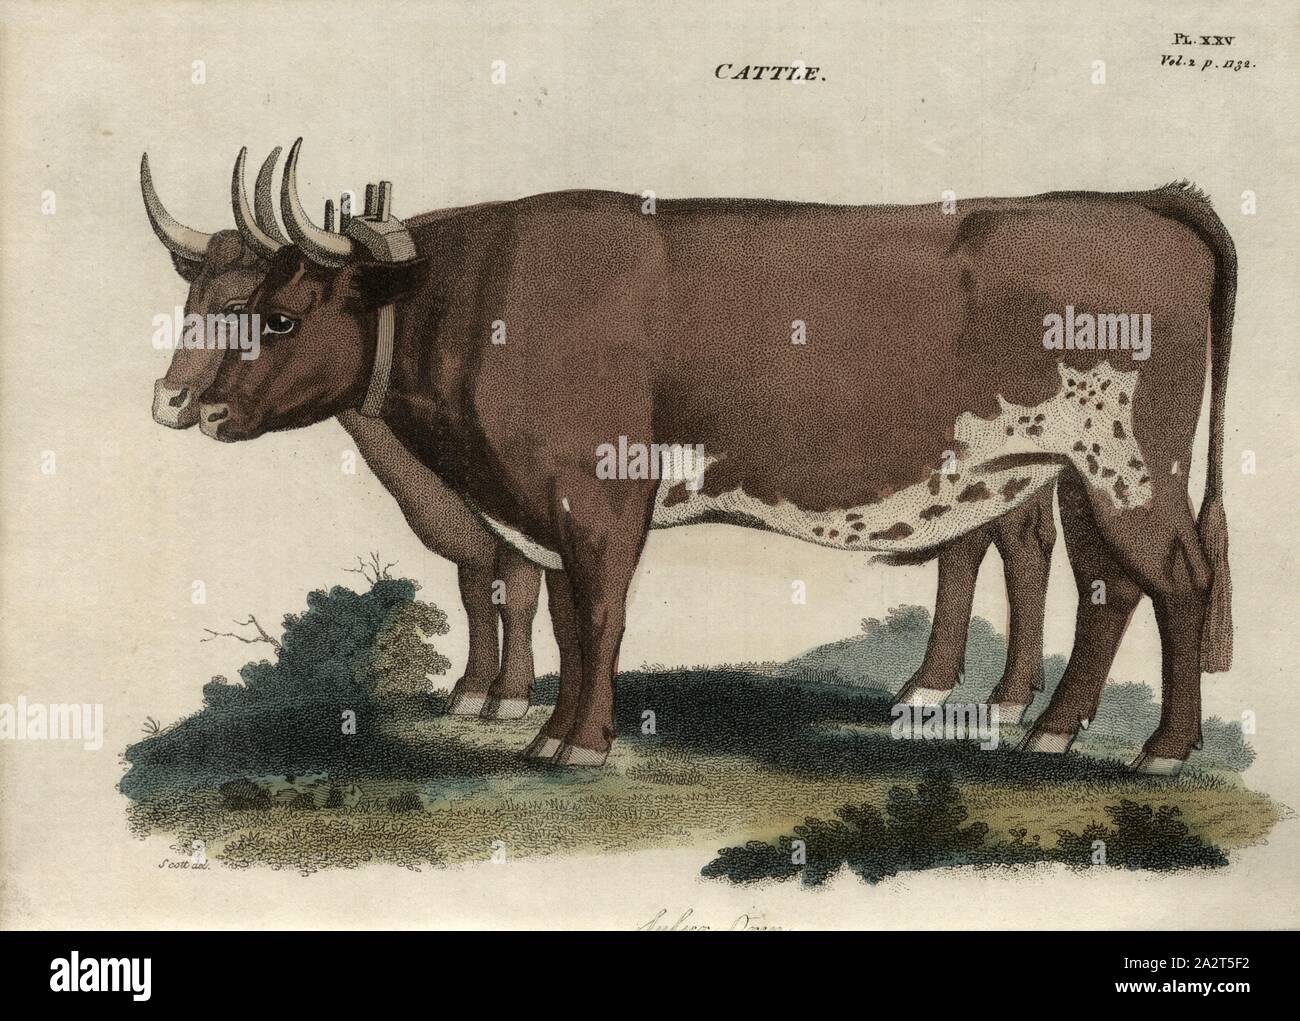 Cattle: Sussex Oxen, Sussex cattle, oxen, signed: Scott del, Fig. 25, Pl. XXV, after p. 1120, Scott (del.), R.W. Dickson: Practical agriculture, or, a complete system of modern husbandry: with the methods of planting, and the management of live stock. Bd. 2. London: printed for Richard Phillips; by R. Taylor and Co., 1805 Stock Photo